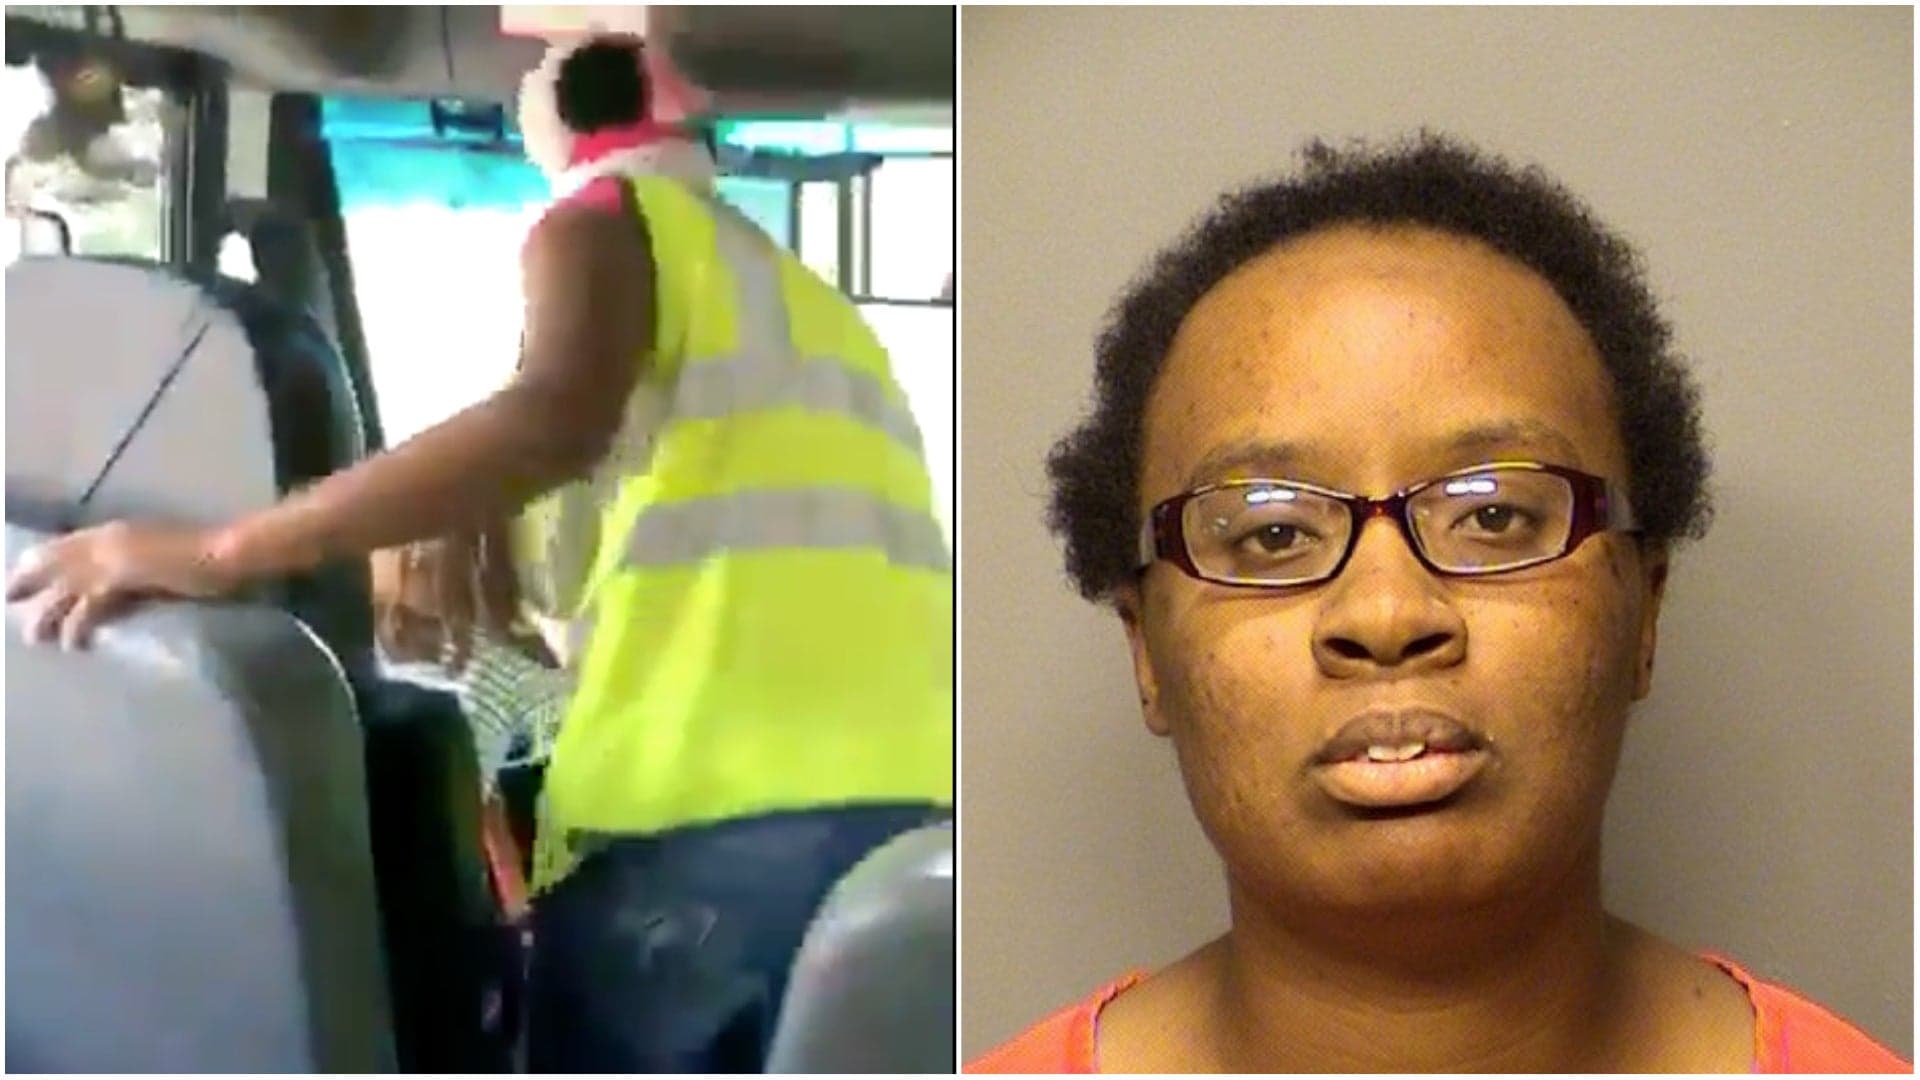 Indiana School Bus Driver Lets Kids Drive, Gets Charged With Felony